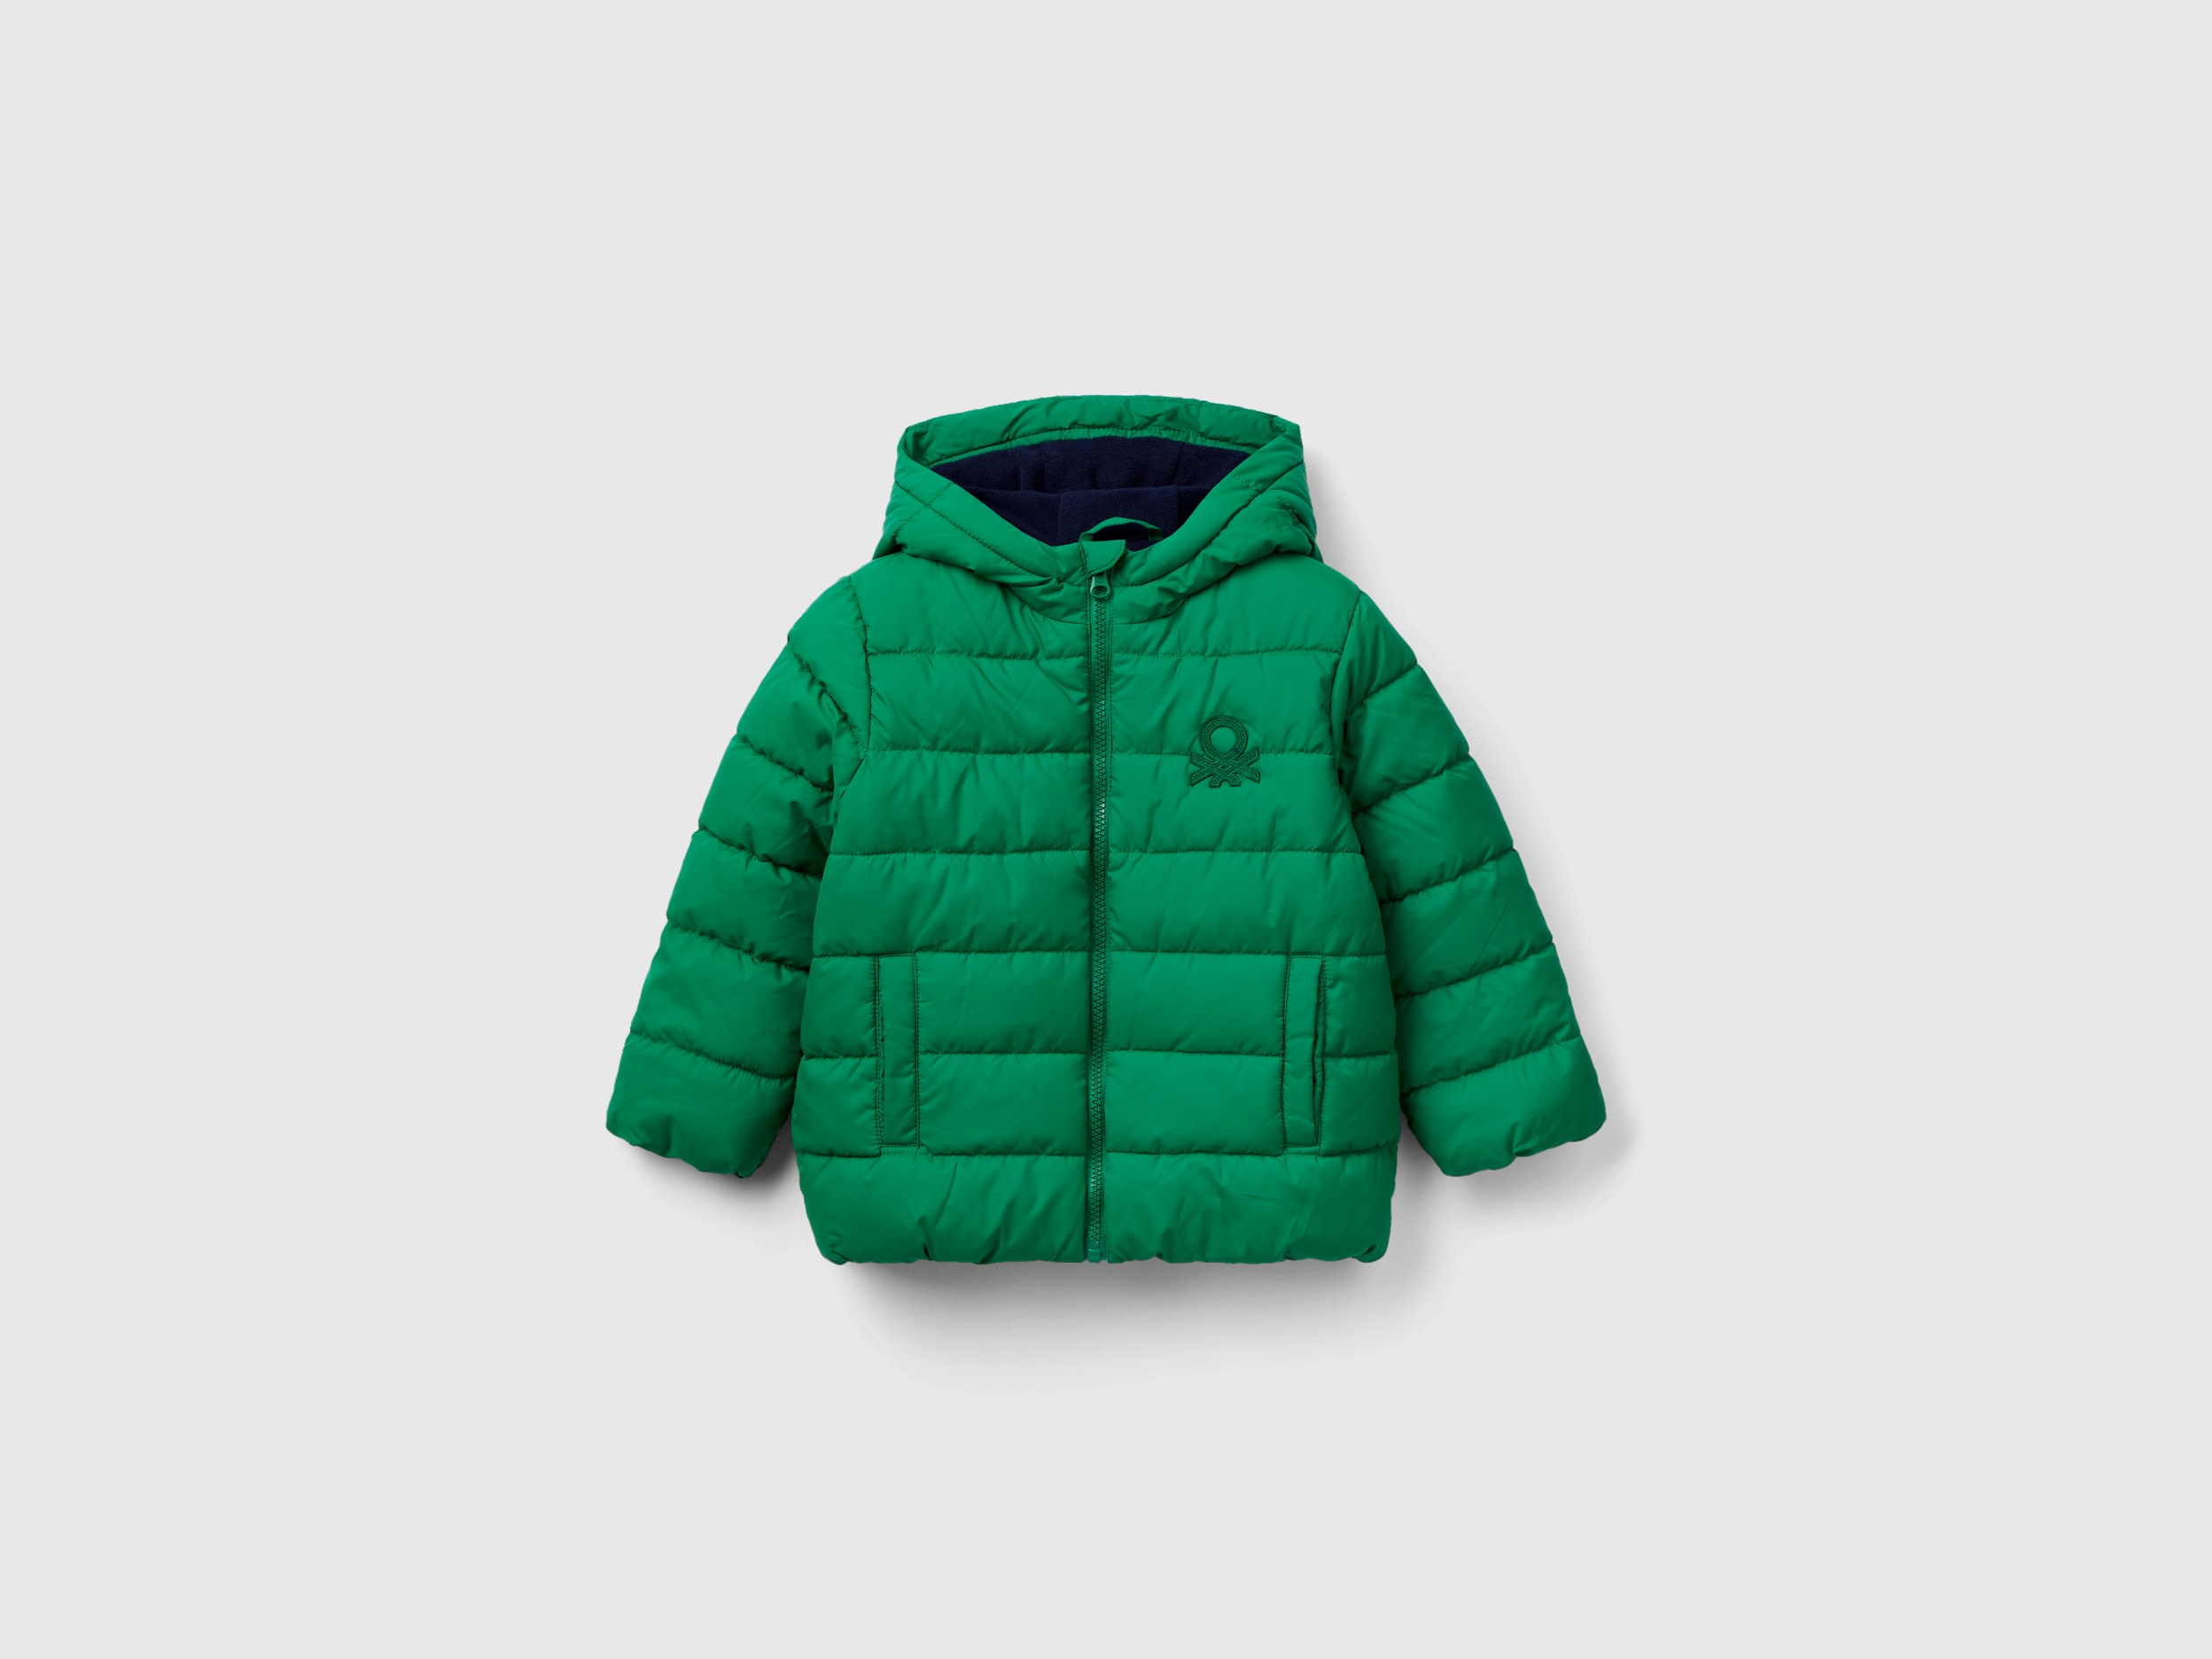 Benetton, Puffer Jacket With Hood And Logo, size 3-4, Green, Kids